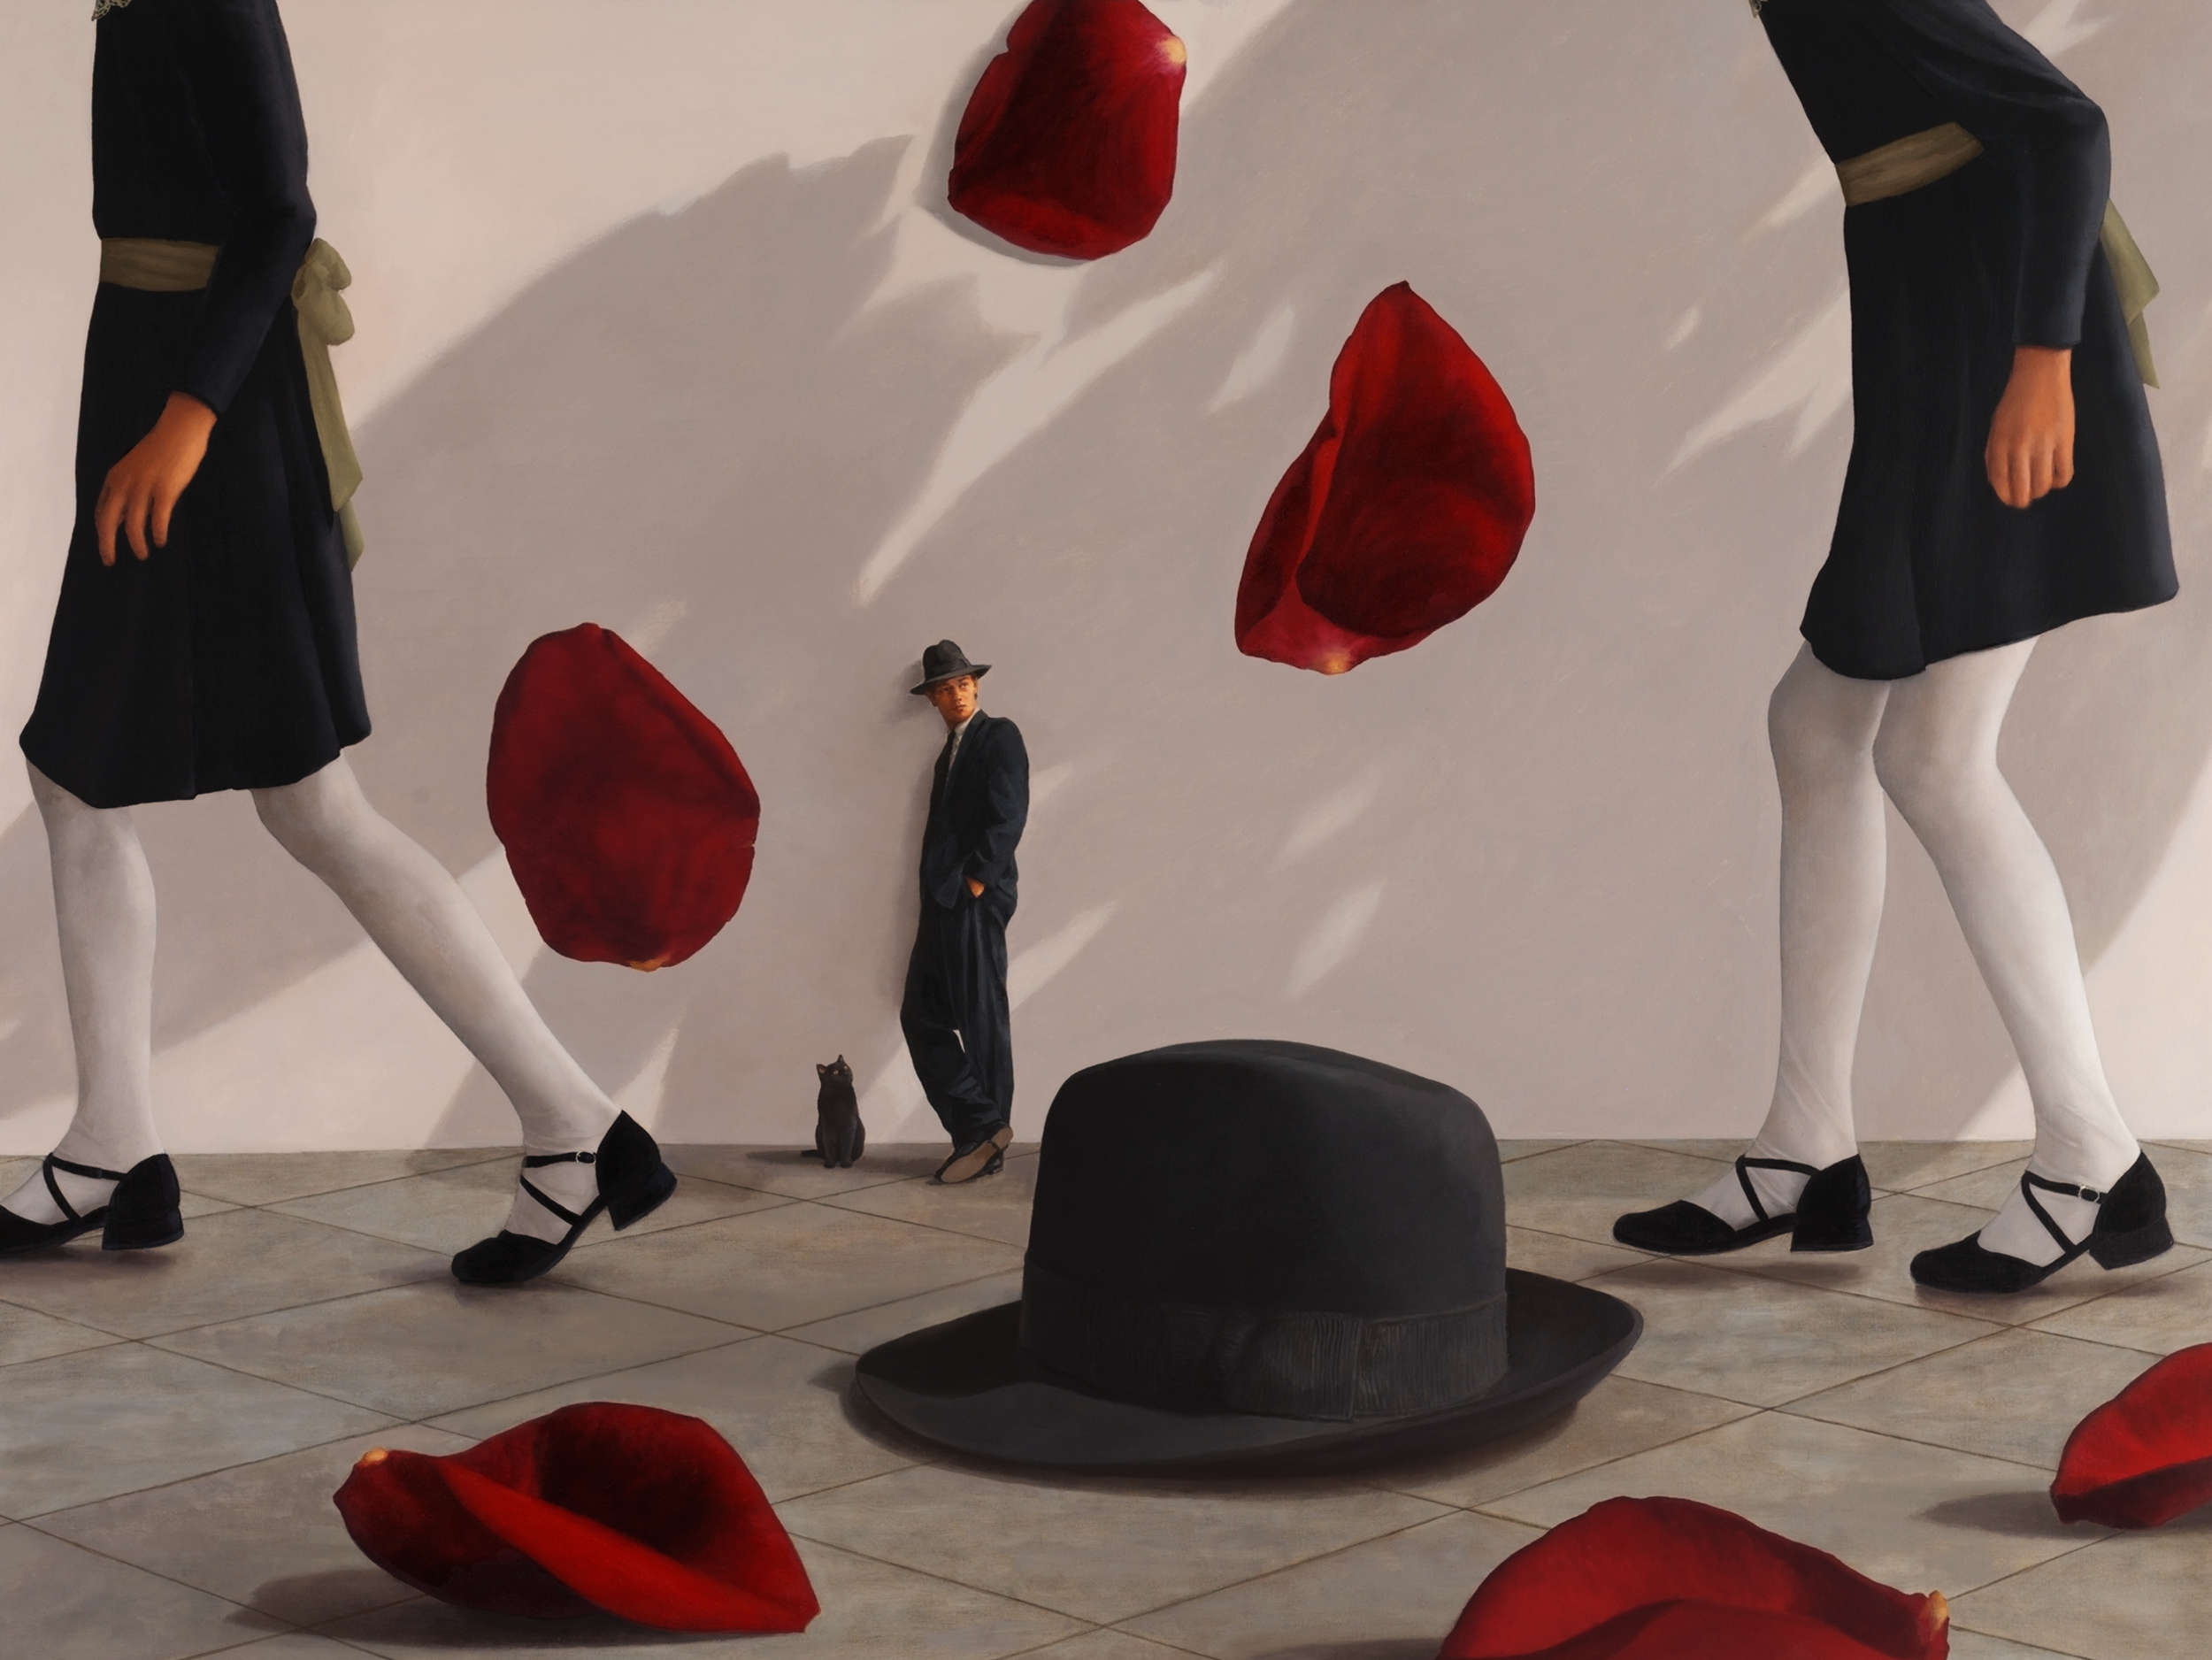 2 little girls tiptoeing, a giant fedora hat, diminutive male figure wearing suit and fedora hat leaning on wall, shadows from roses, red rose petals falling and fallen, black cat